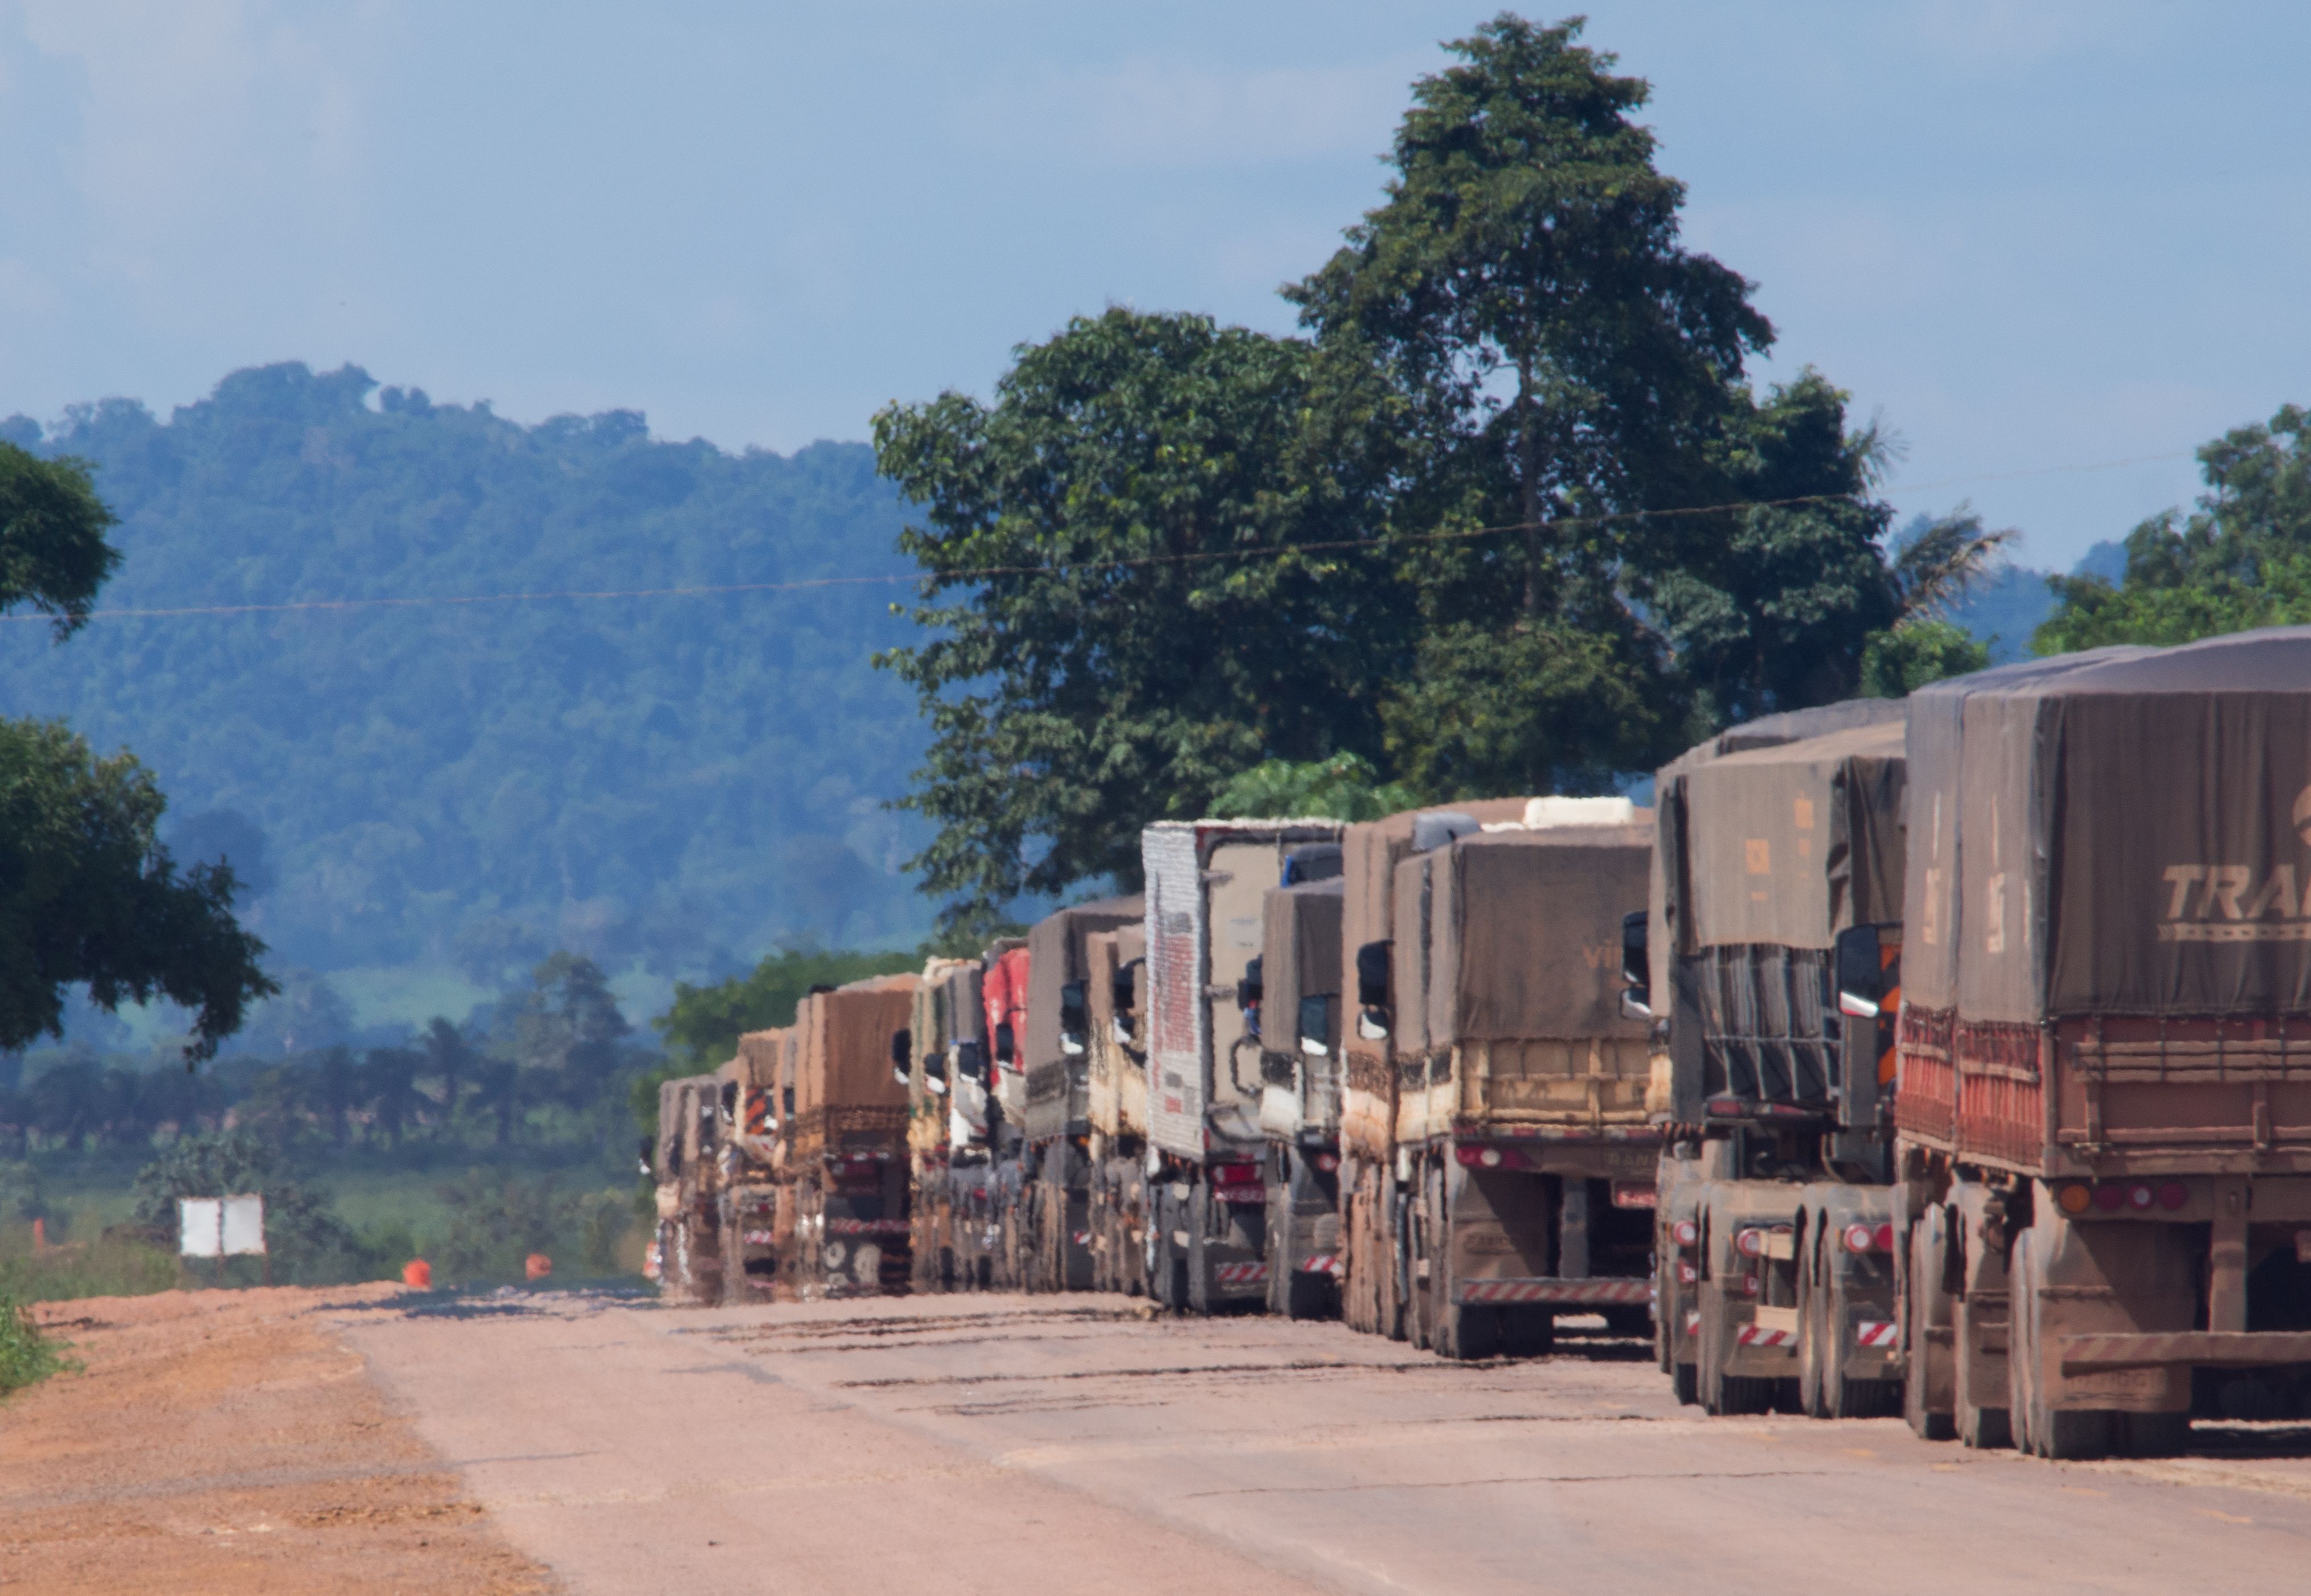 Trucks carry soy, corn, and beef along one of the main highways cutting across the Amazon basin. Much of these food commodities are bound for China. Image by Heriberto Araújo. Brazil, 2019.